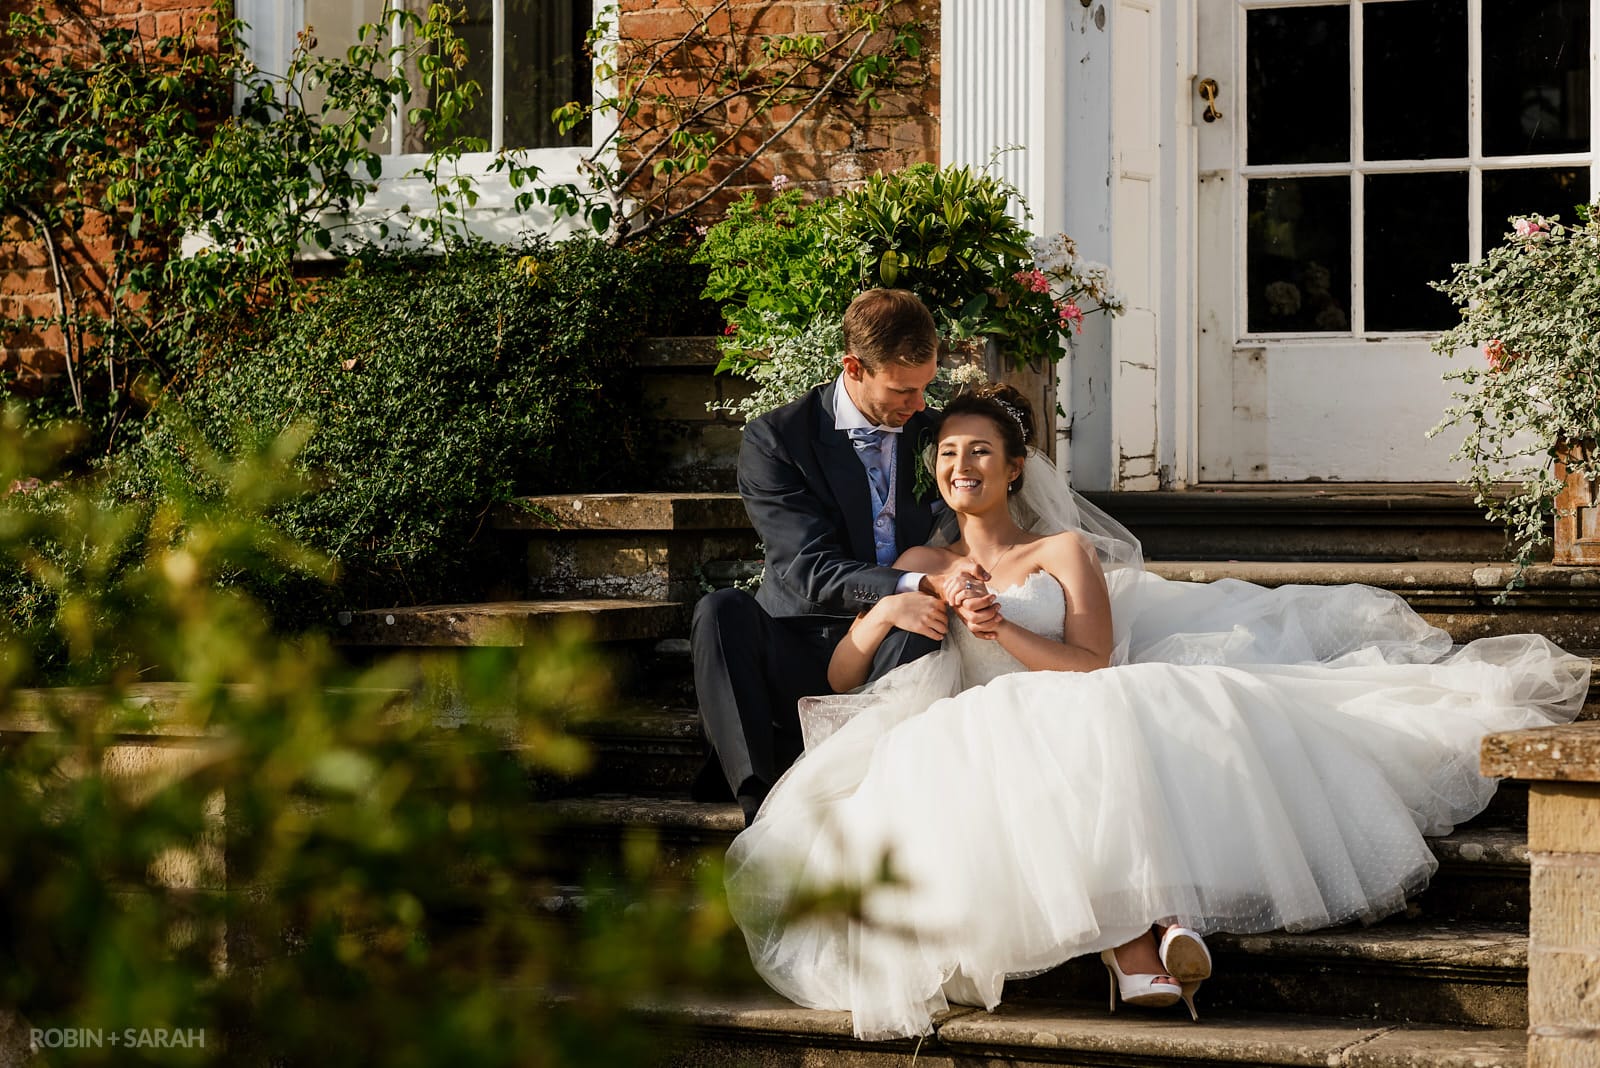 Bride and groom laughing while sitting on steps and enjoying the evening sunshine